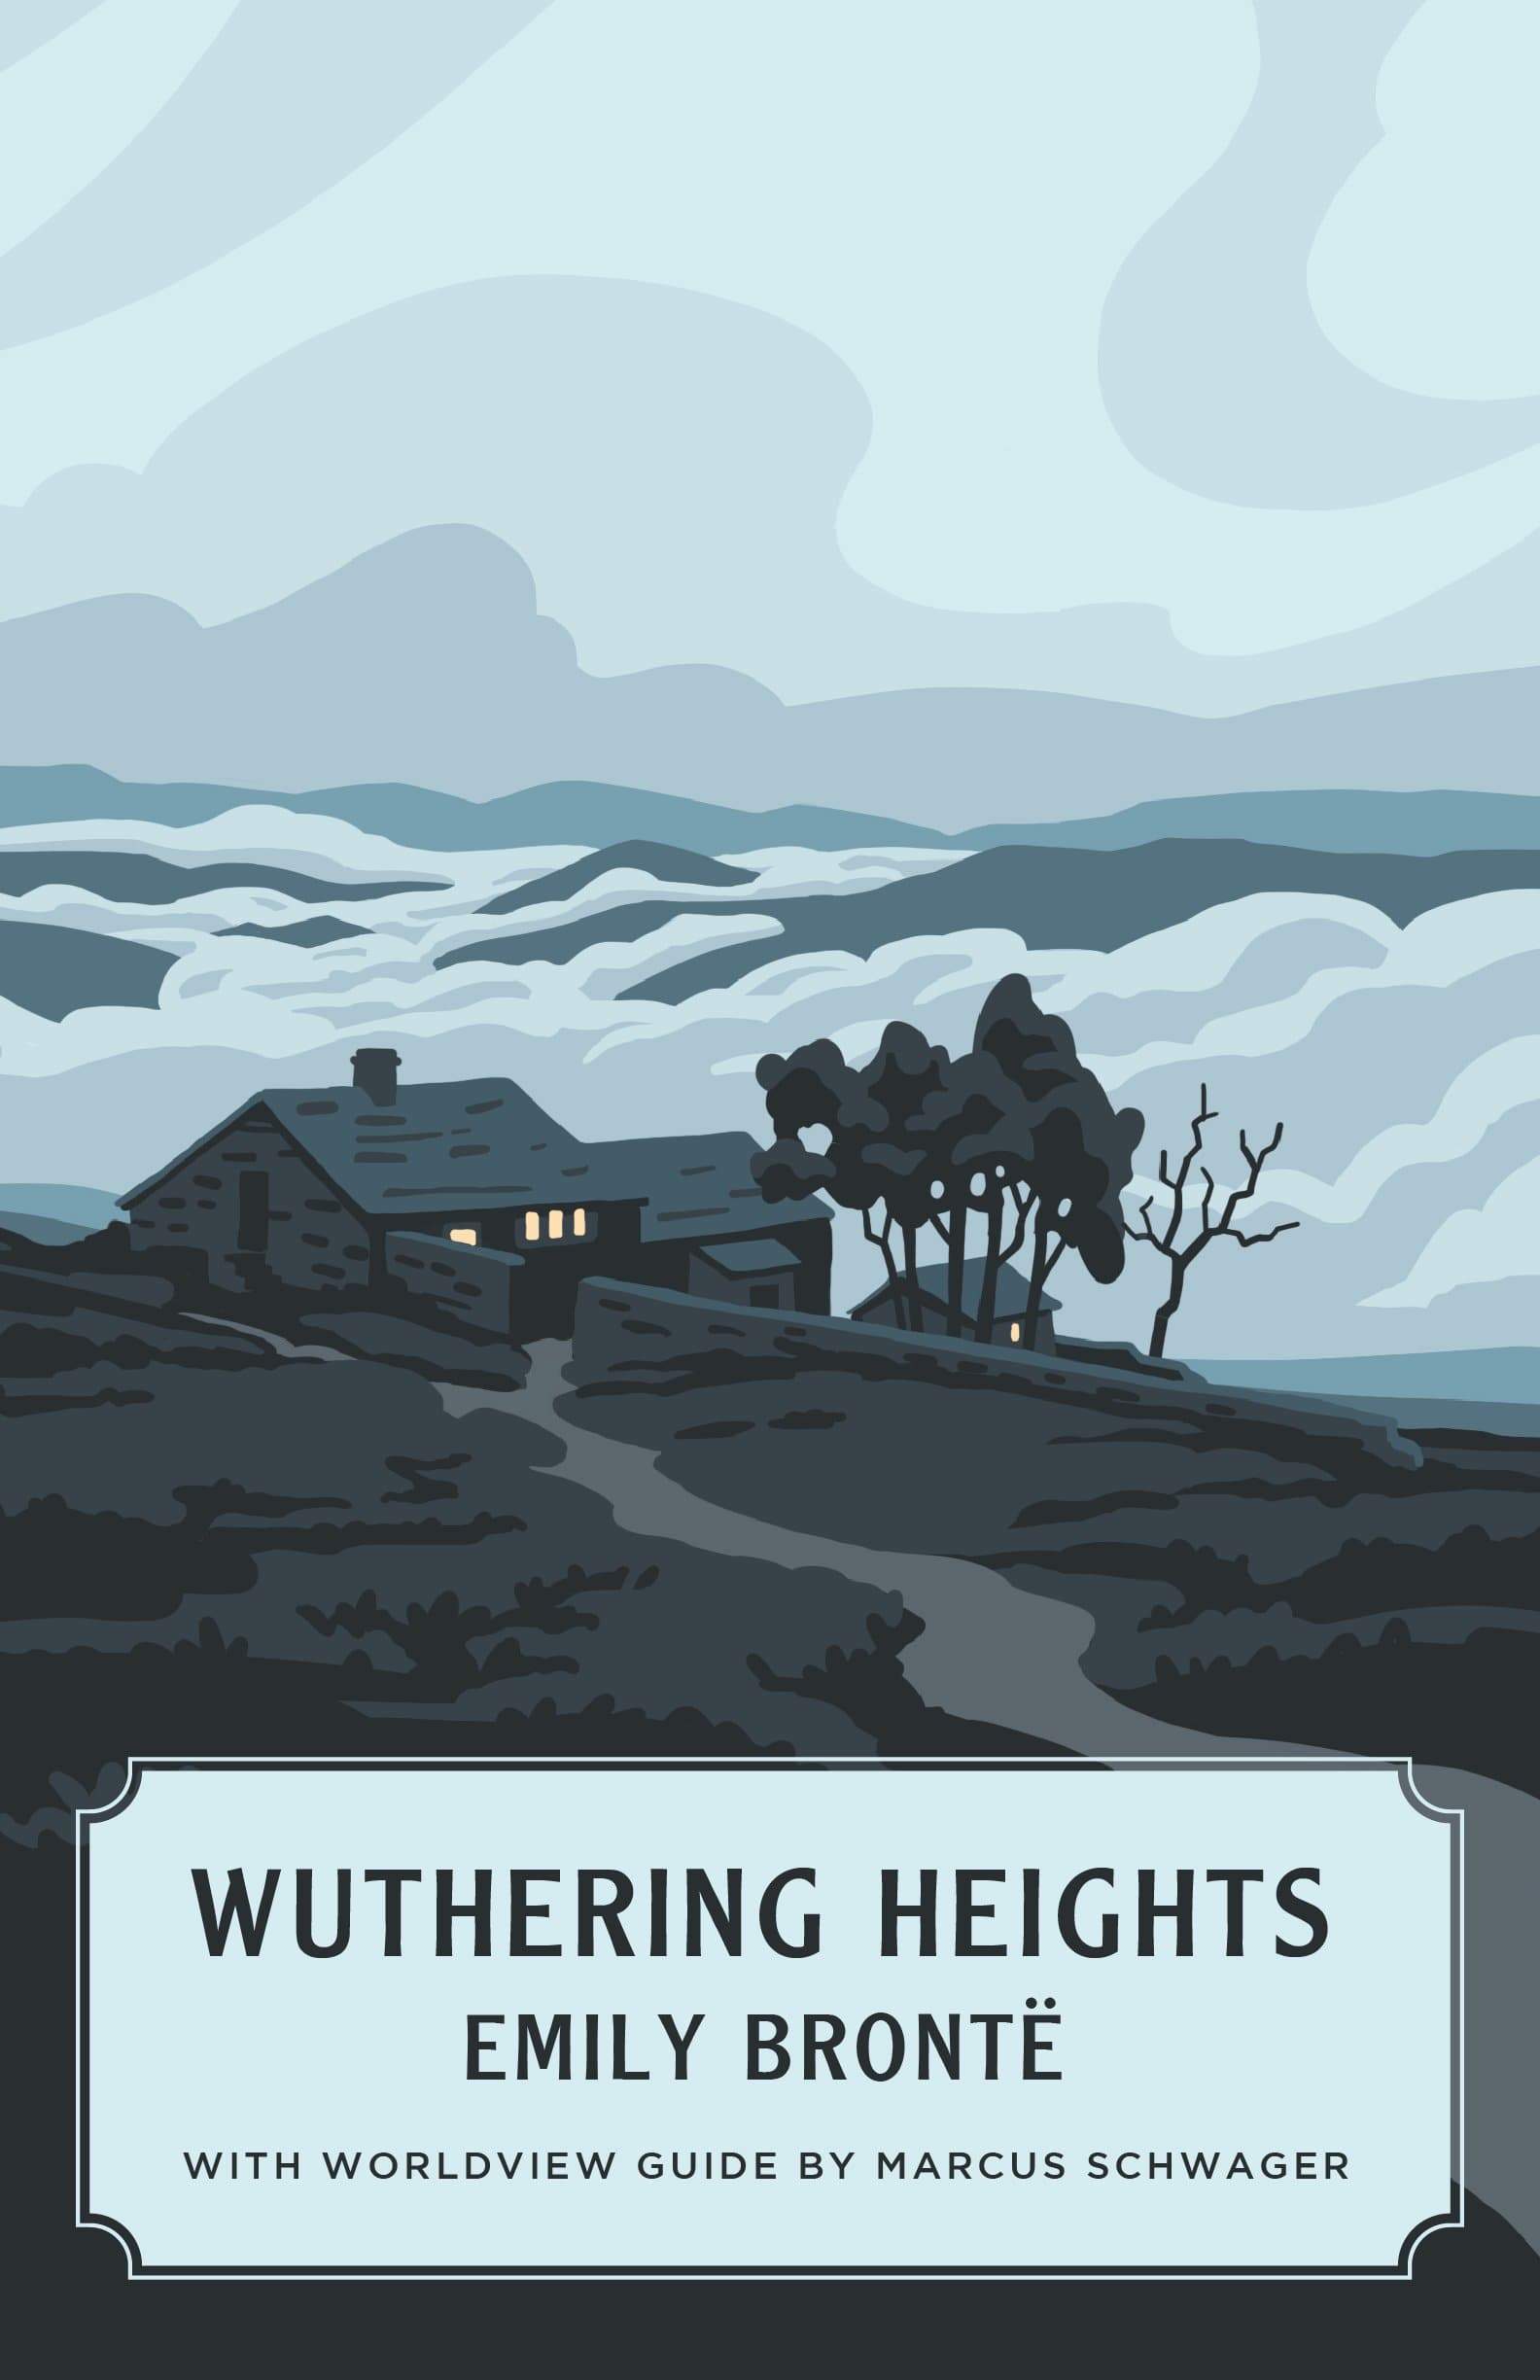 https://cdn.shopify.com/s/files/1/0154/4706/4624/products/canon-classics-books-wuthering-heights-worldview-edition-28066830286896.jpg?v=1616172364